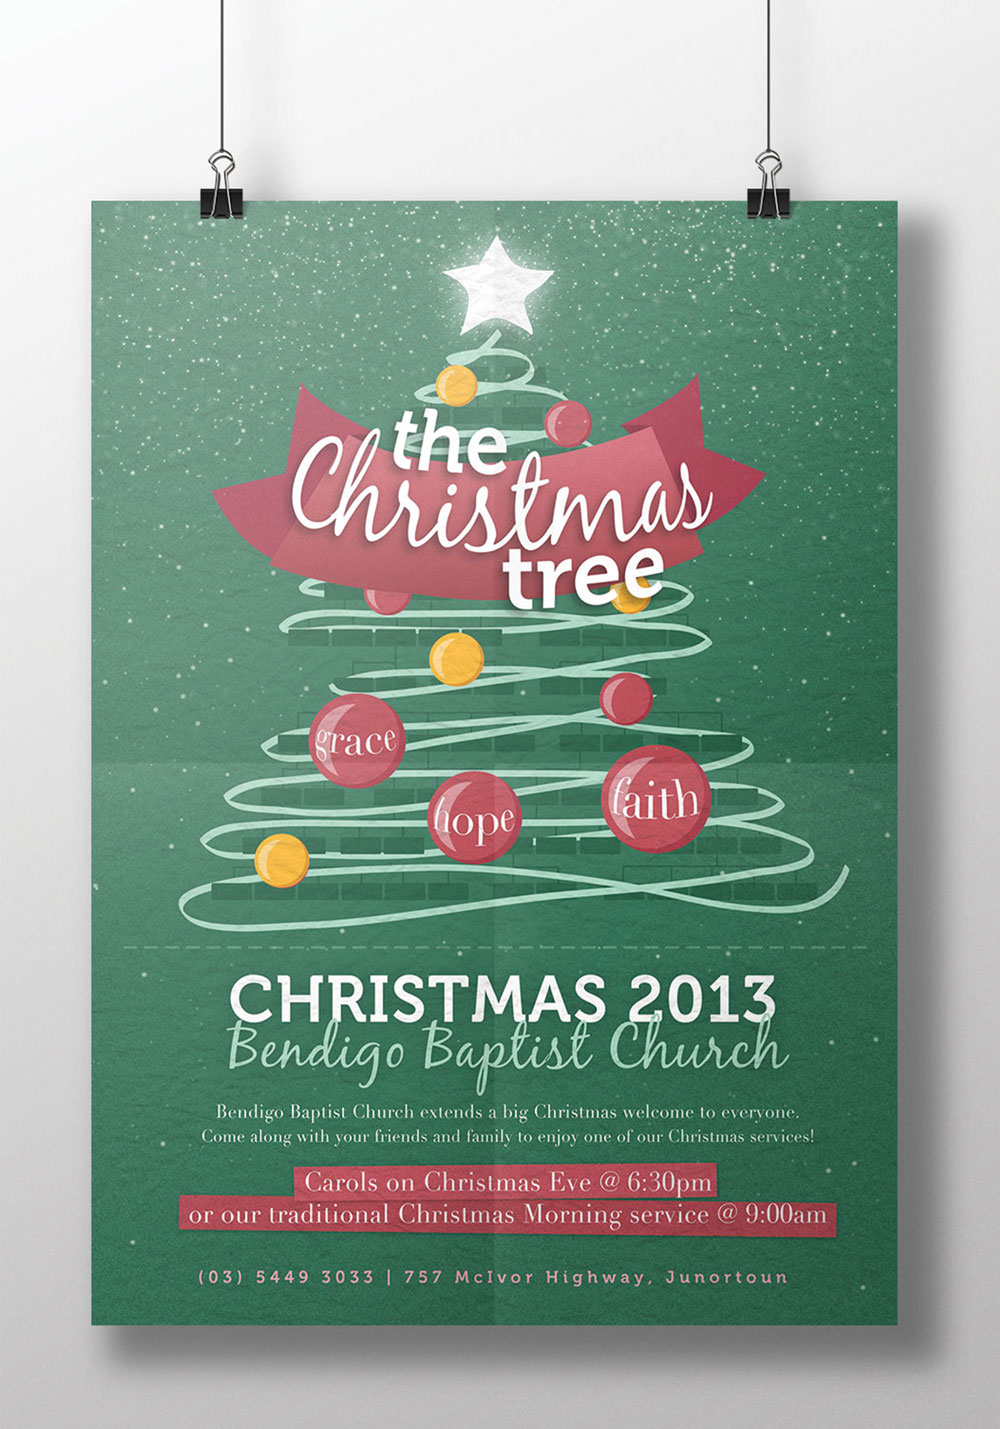  2013 Christmas imagery. Poster, flyer, bulletin, banner, nametags, slideshow, decorations were all made using this graphic.&nbsp; 